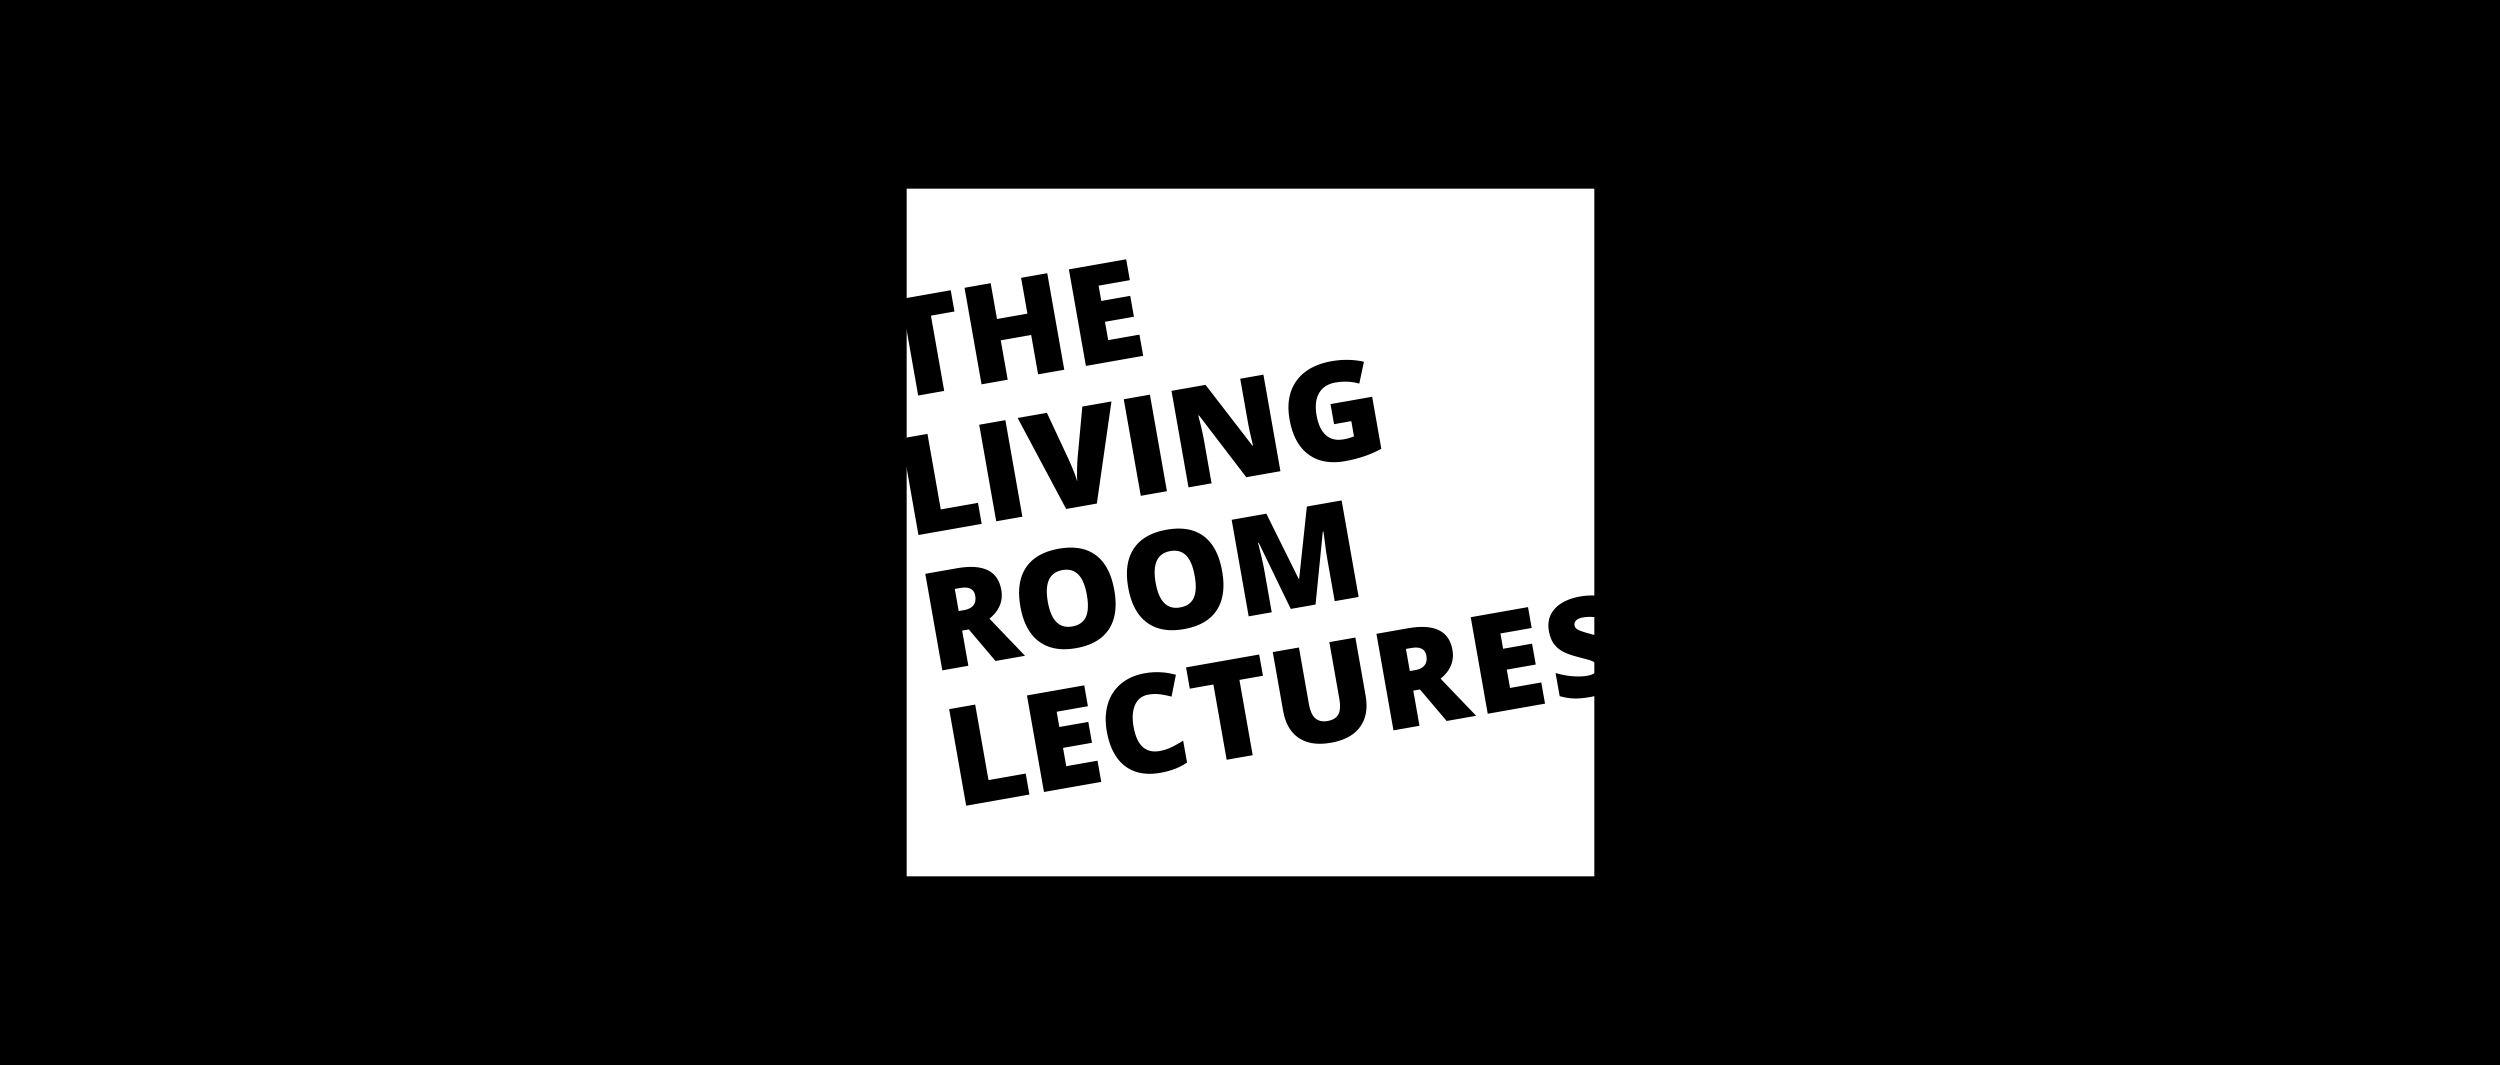 Text inside white box that reads "The Living Room Lectures"